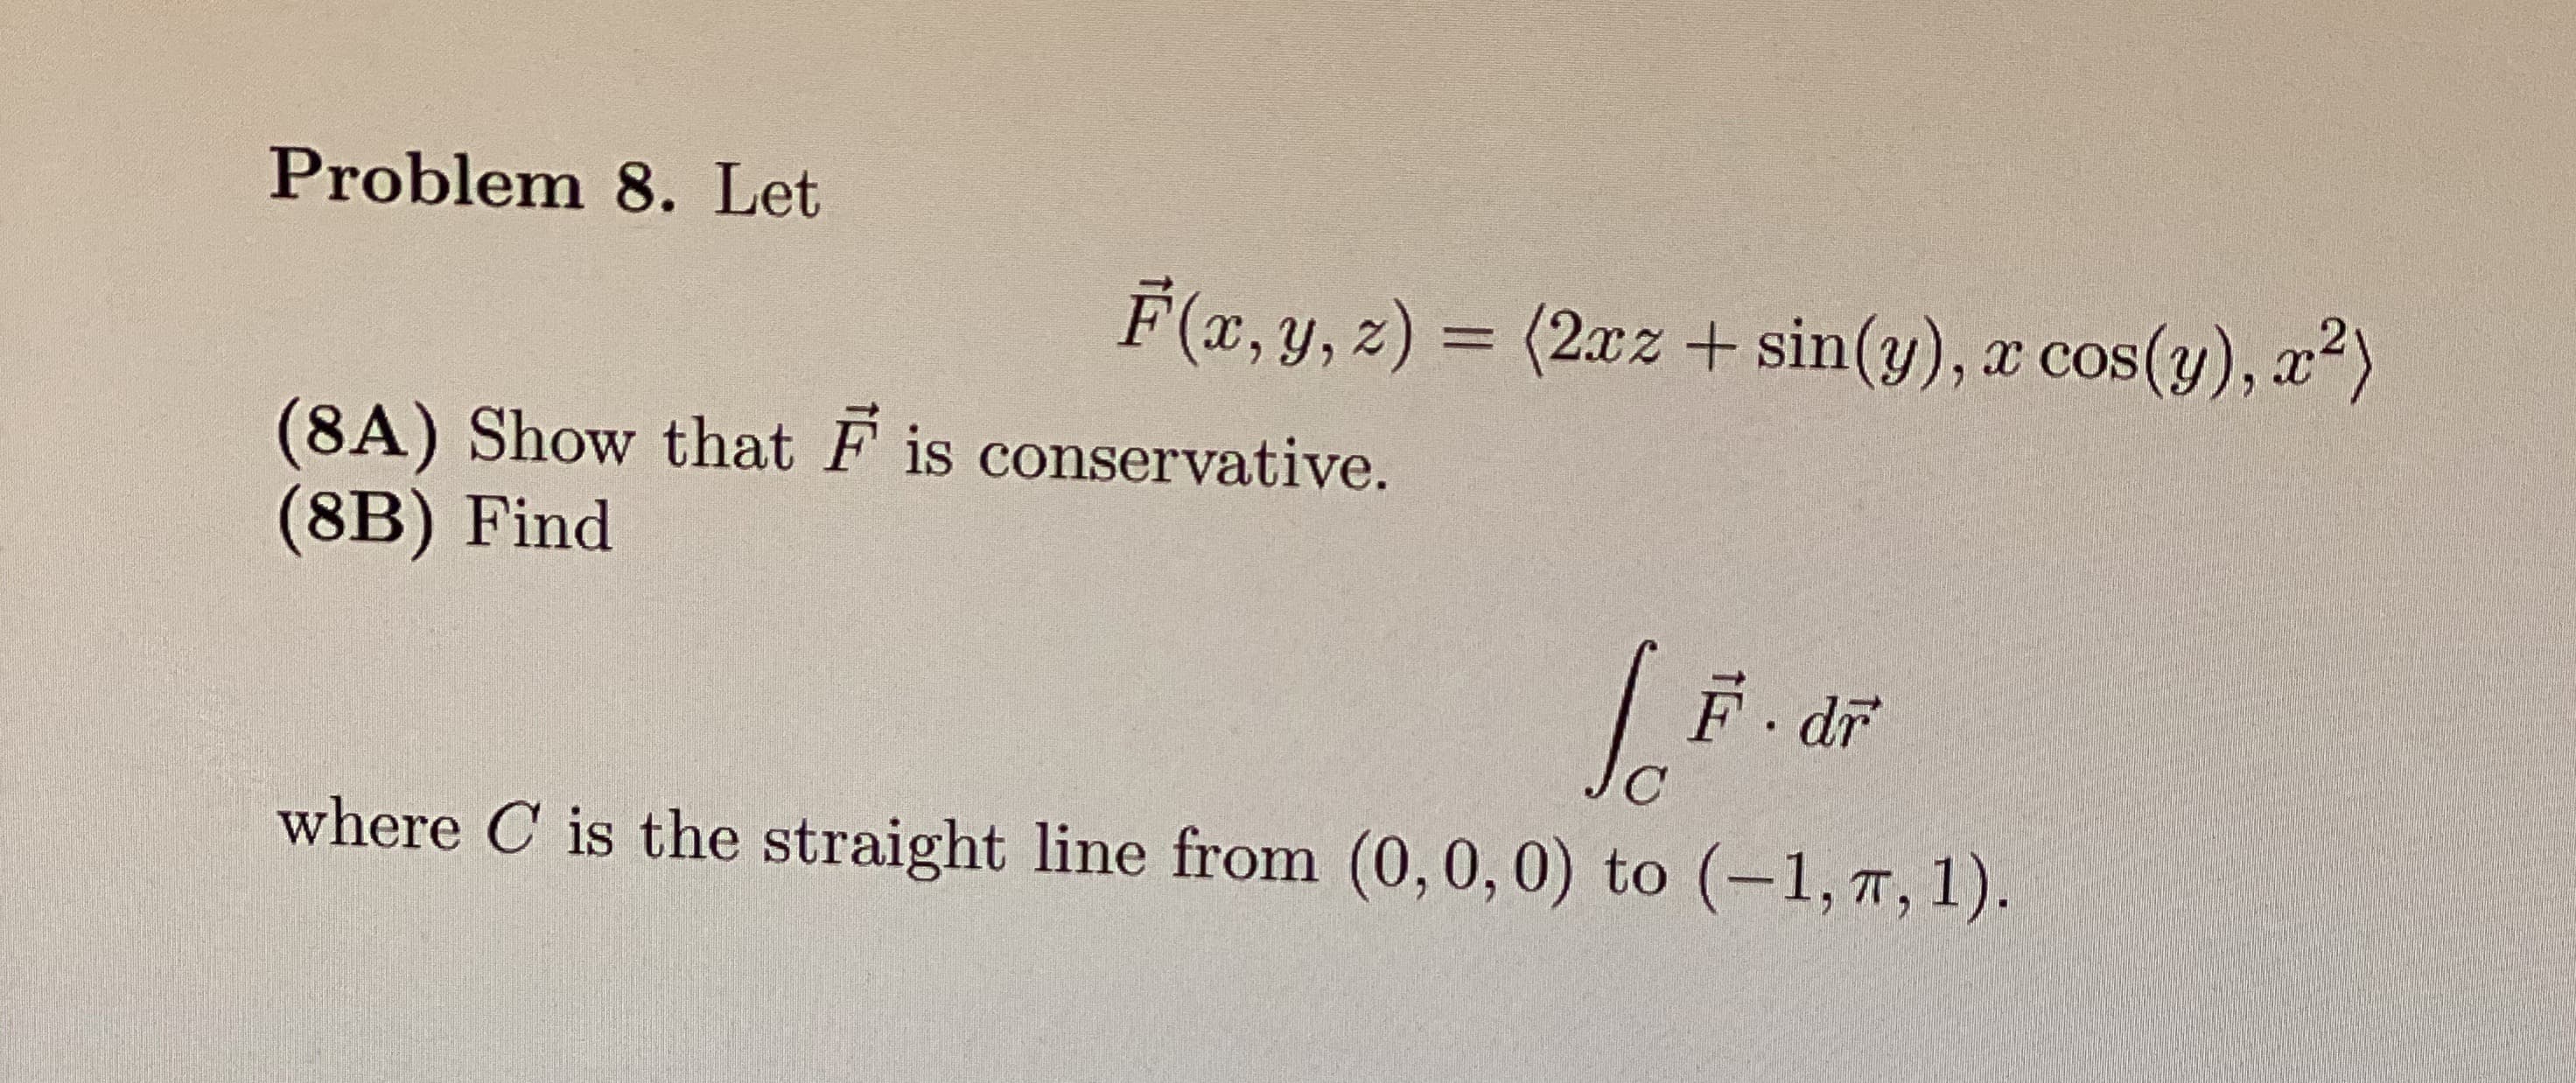 Problem 8. Let
F(x, y, 2) = (2x2 + sin(y), a cos(y), x²)
%3D
|(8A) Show that F is conservative.
(8B) Find
F dr
where C is the straight line from (0,0,0) to (-1, 7, 1).
